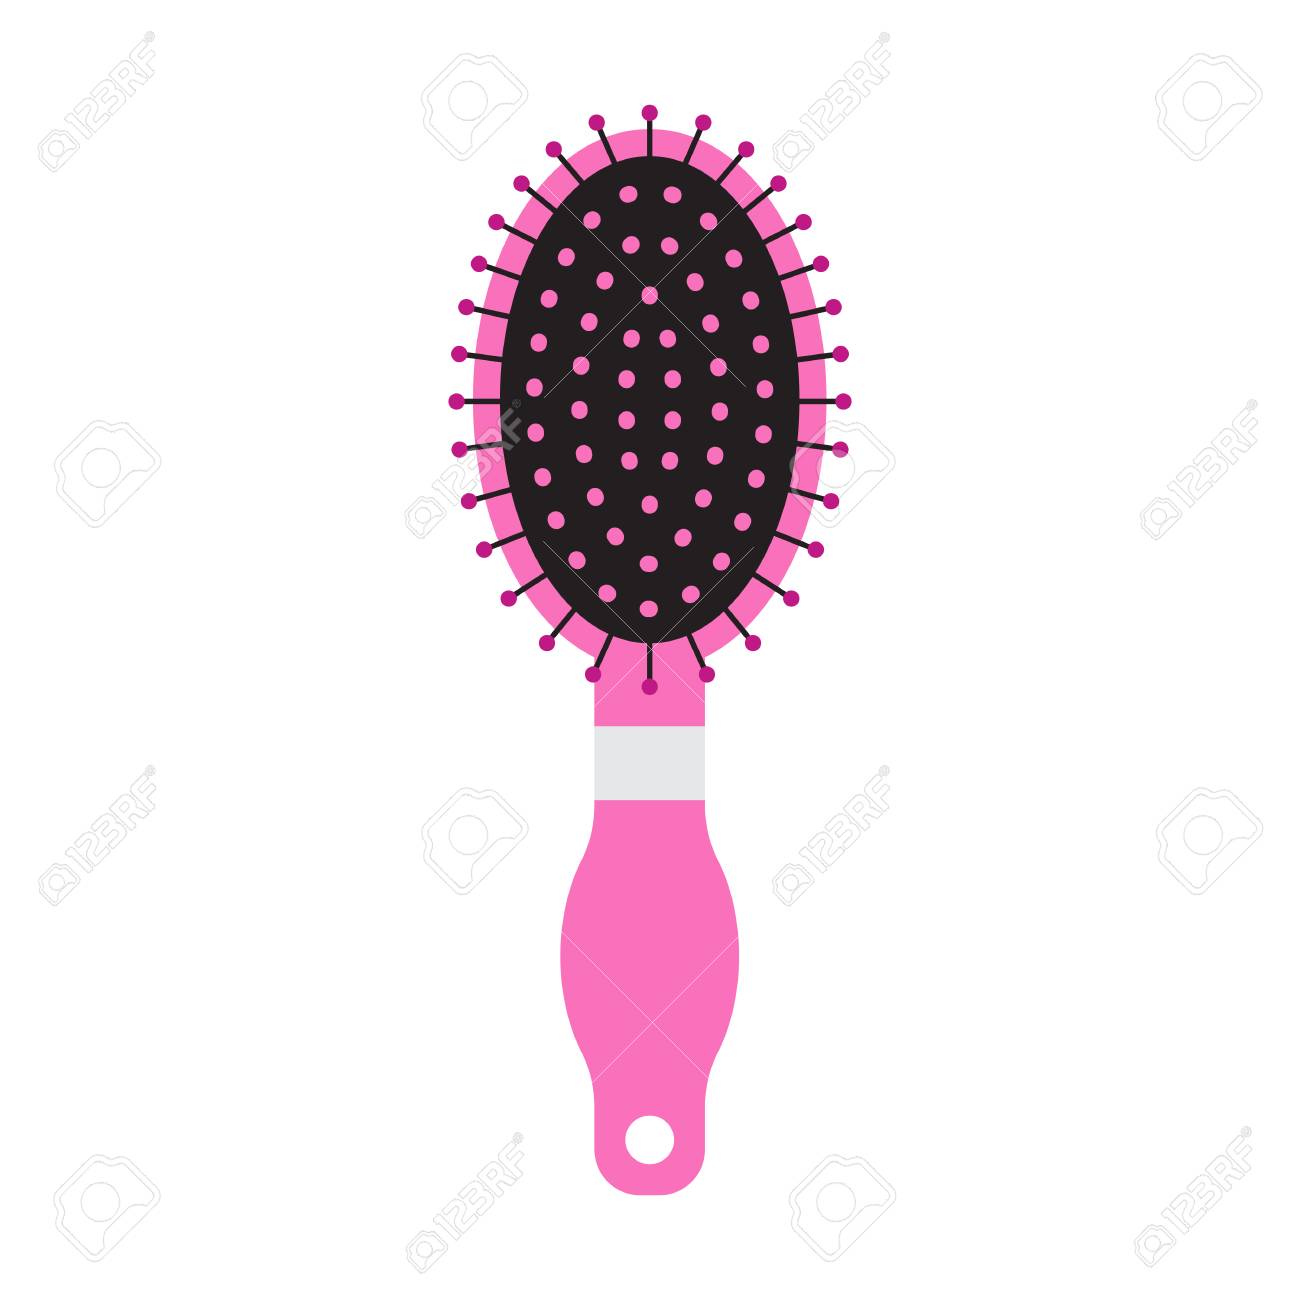 pink hair brush in modern flat style isolated on white background.